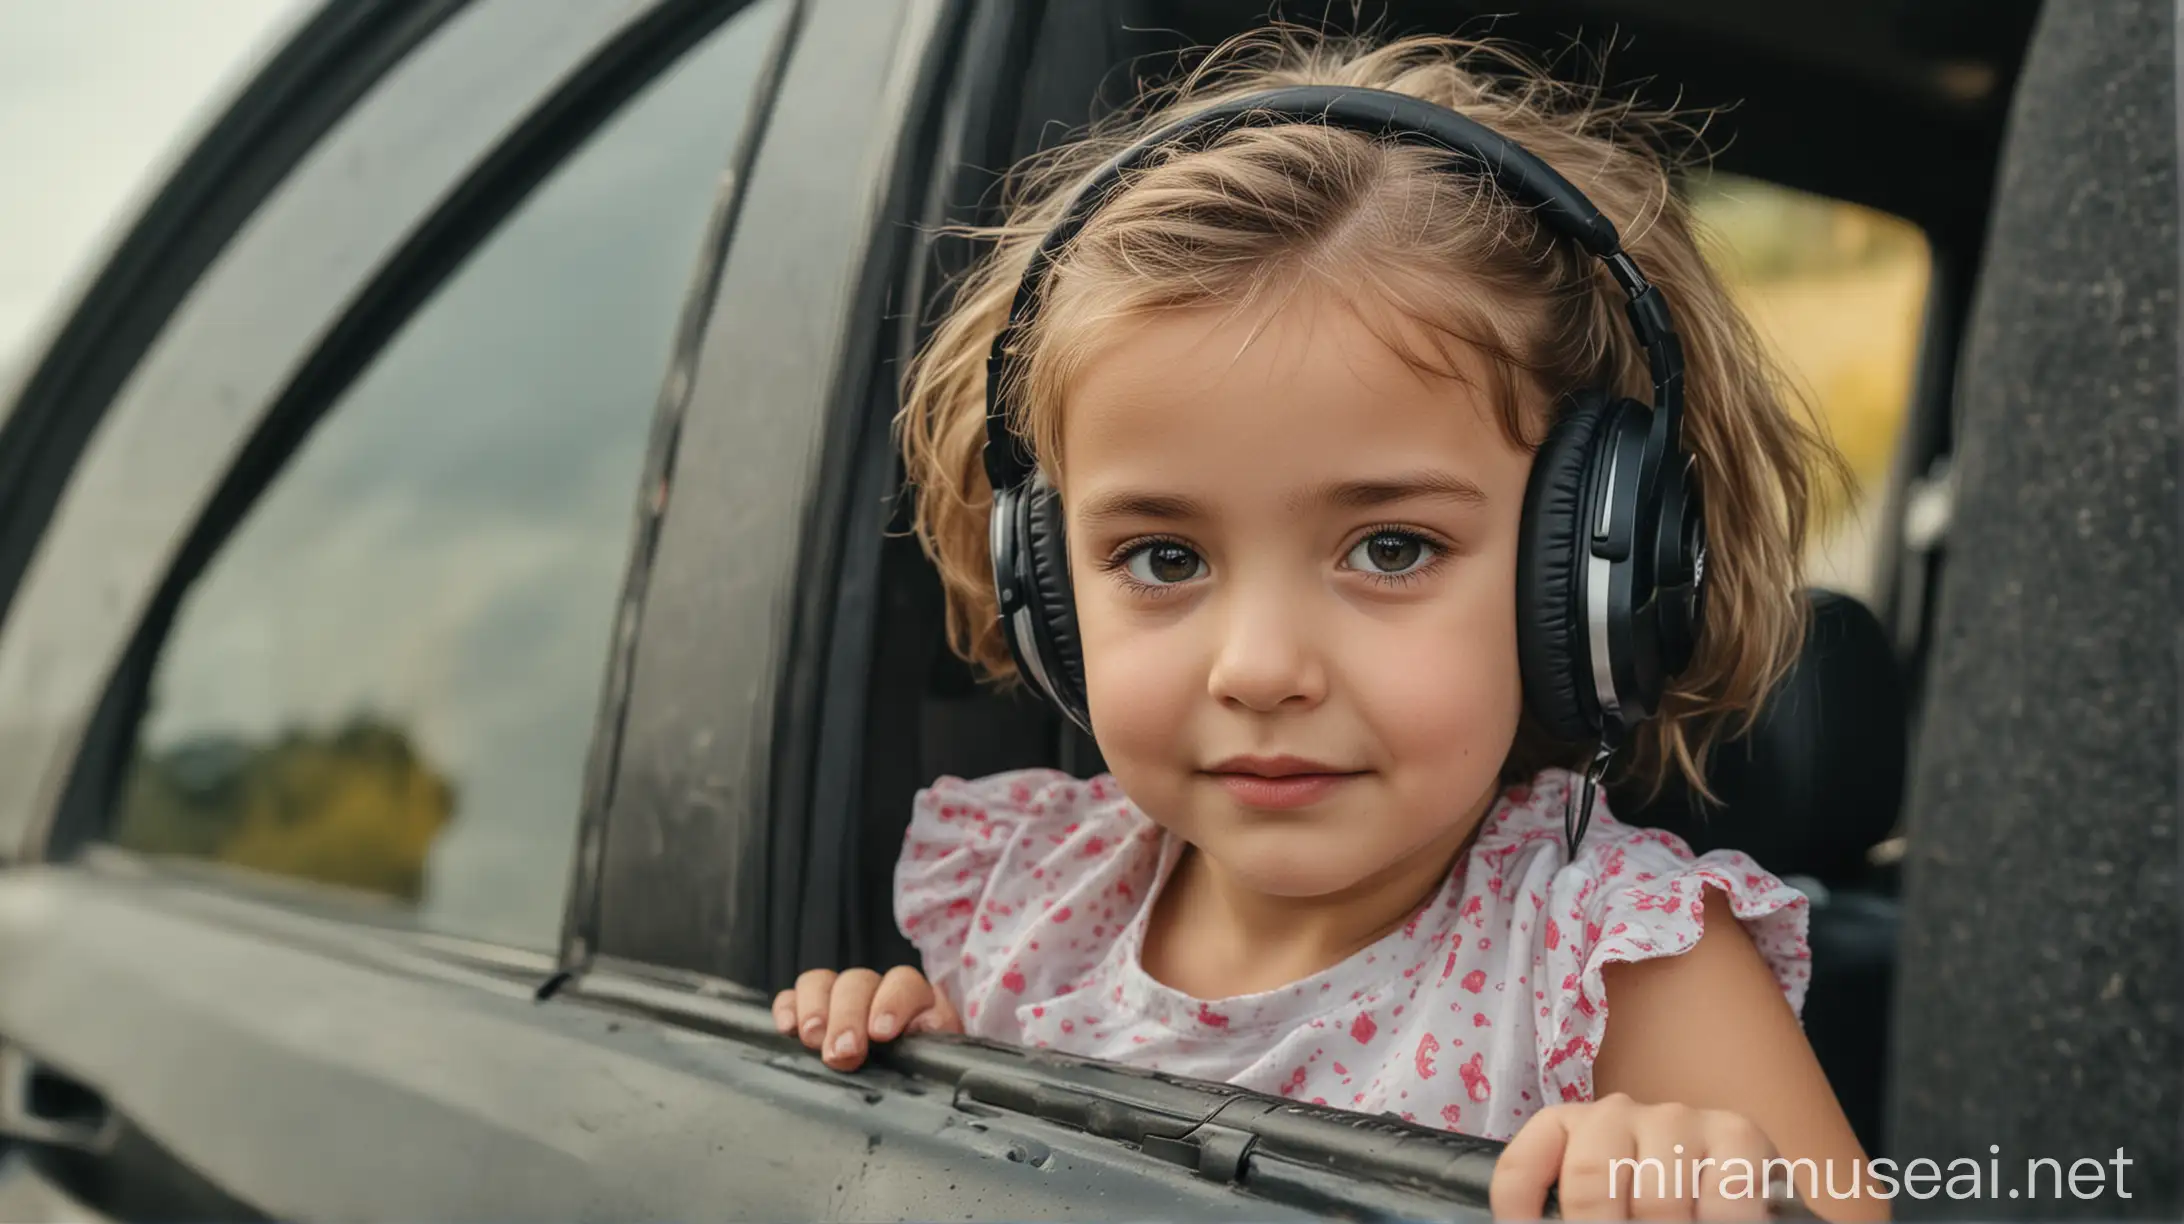 Curious Child in Car Little Girl with Headphones Observing Outside